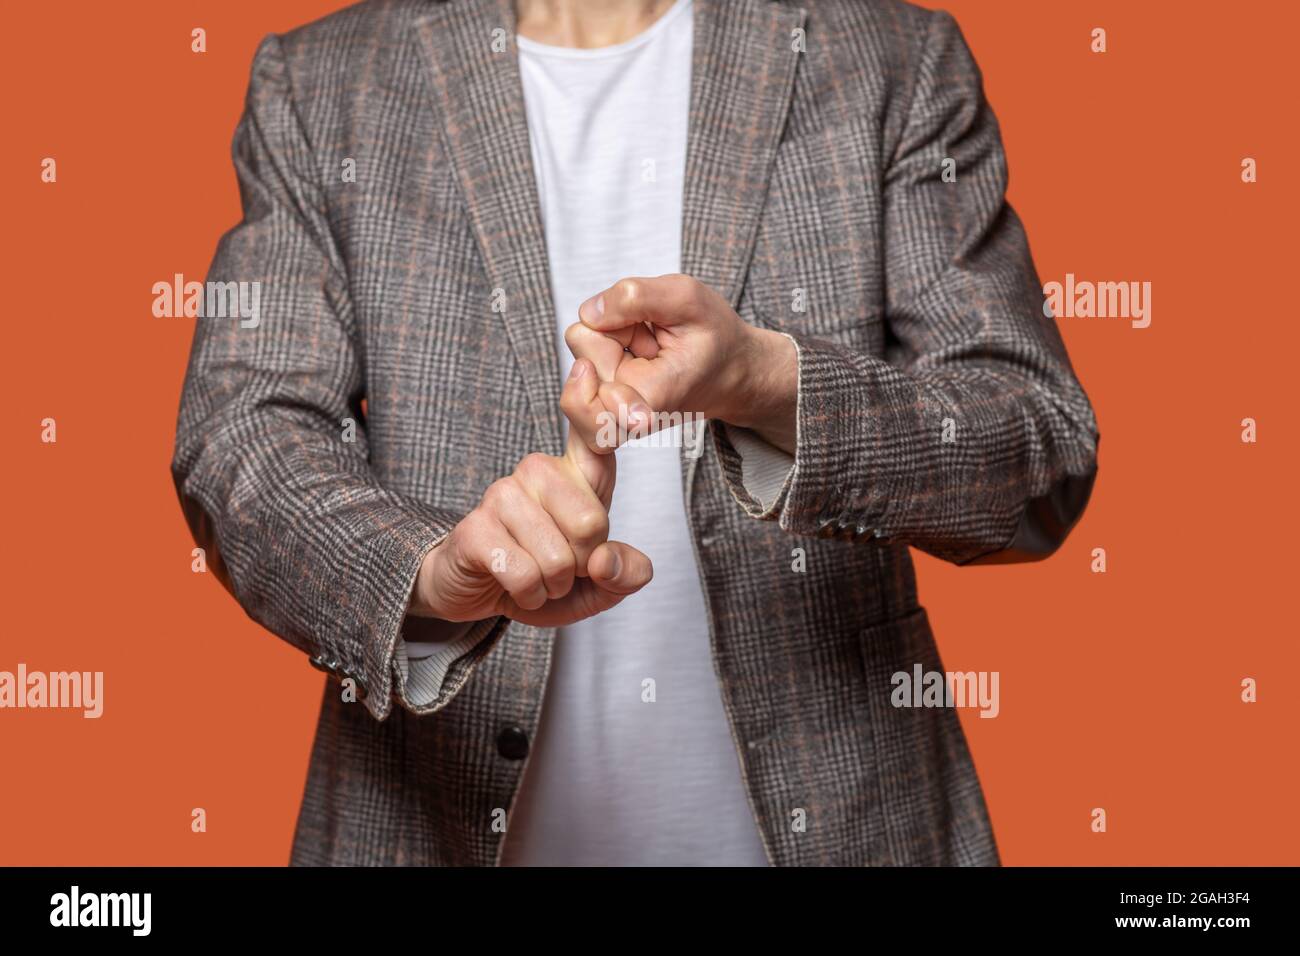 Hands of a man talking with signs and gestures Stock Photo